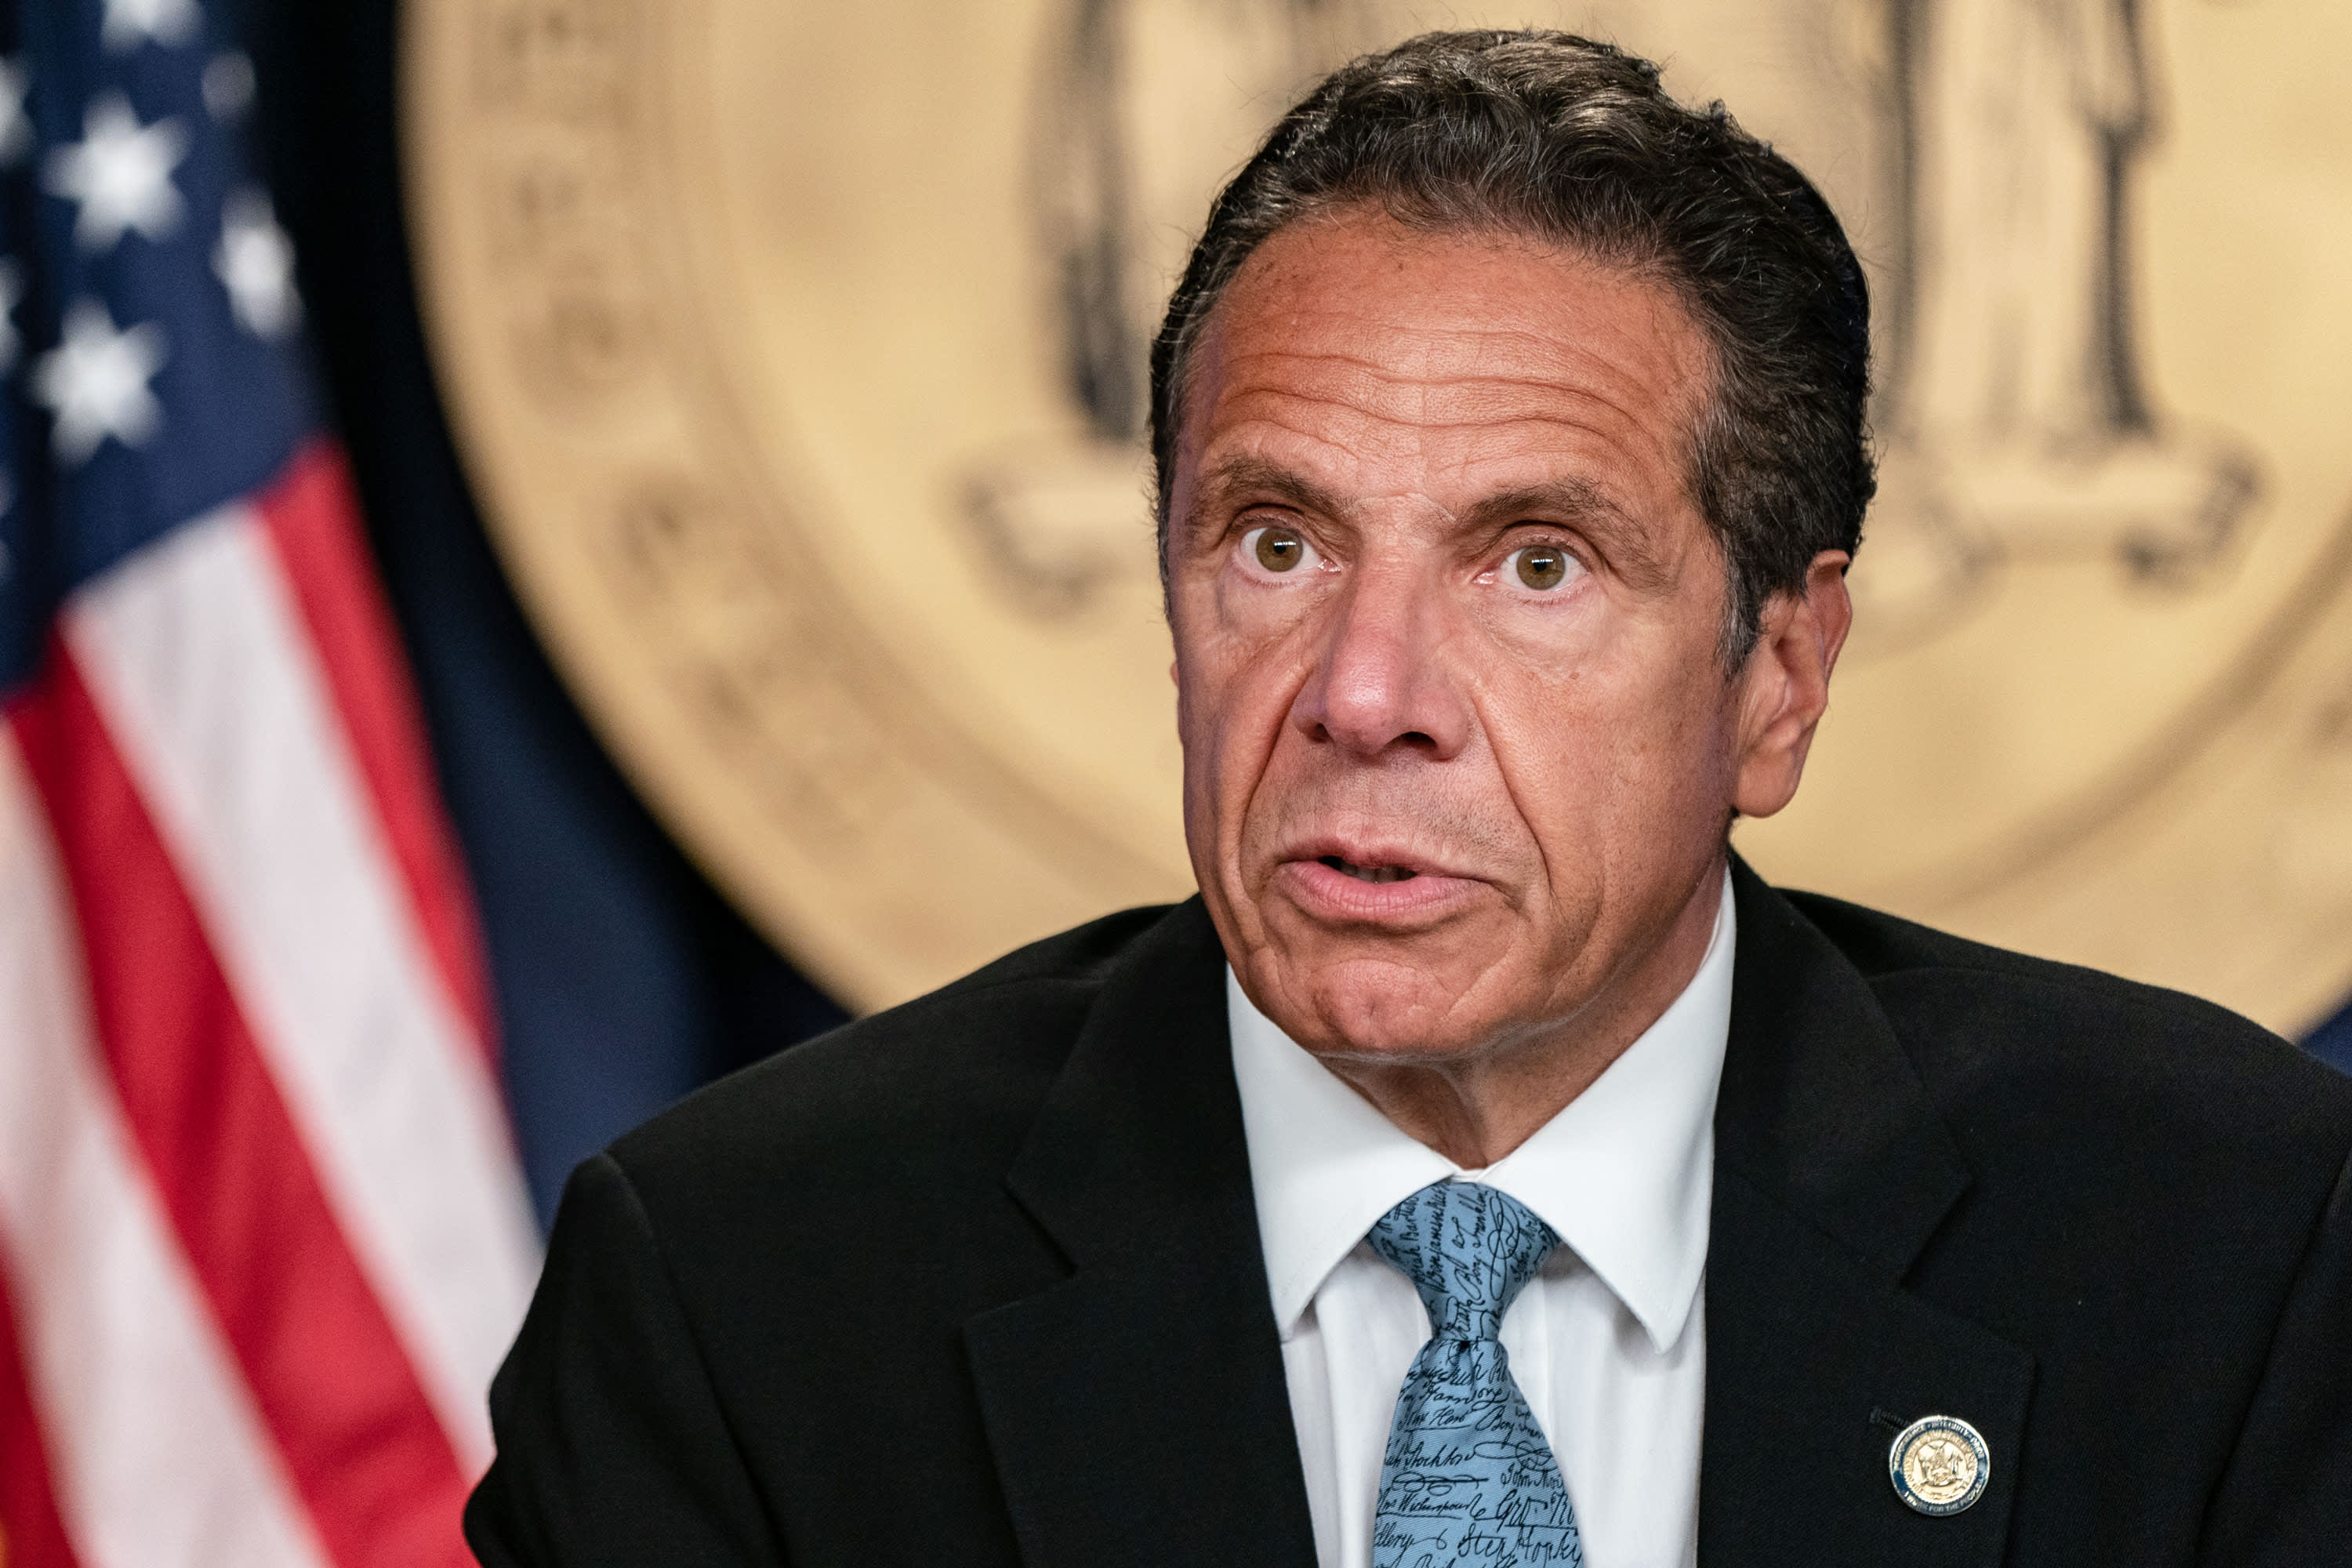 Two more women accuse New York Governor Andrew Cuomo of misconduct